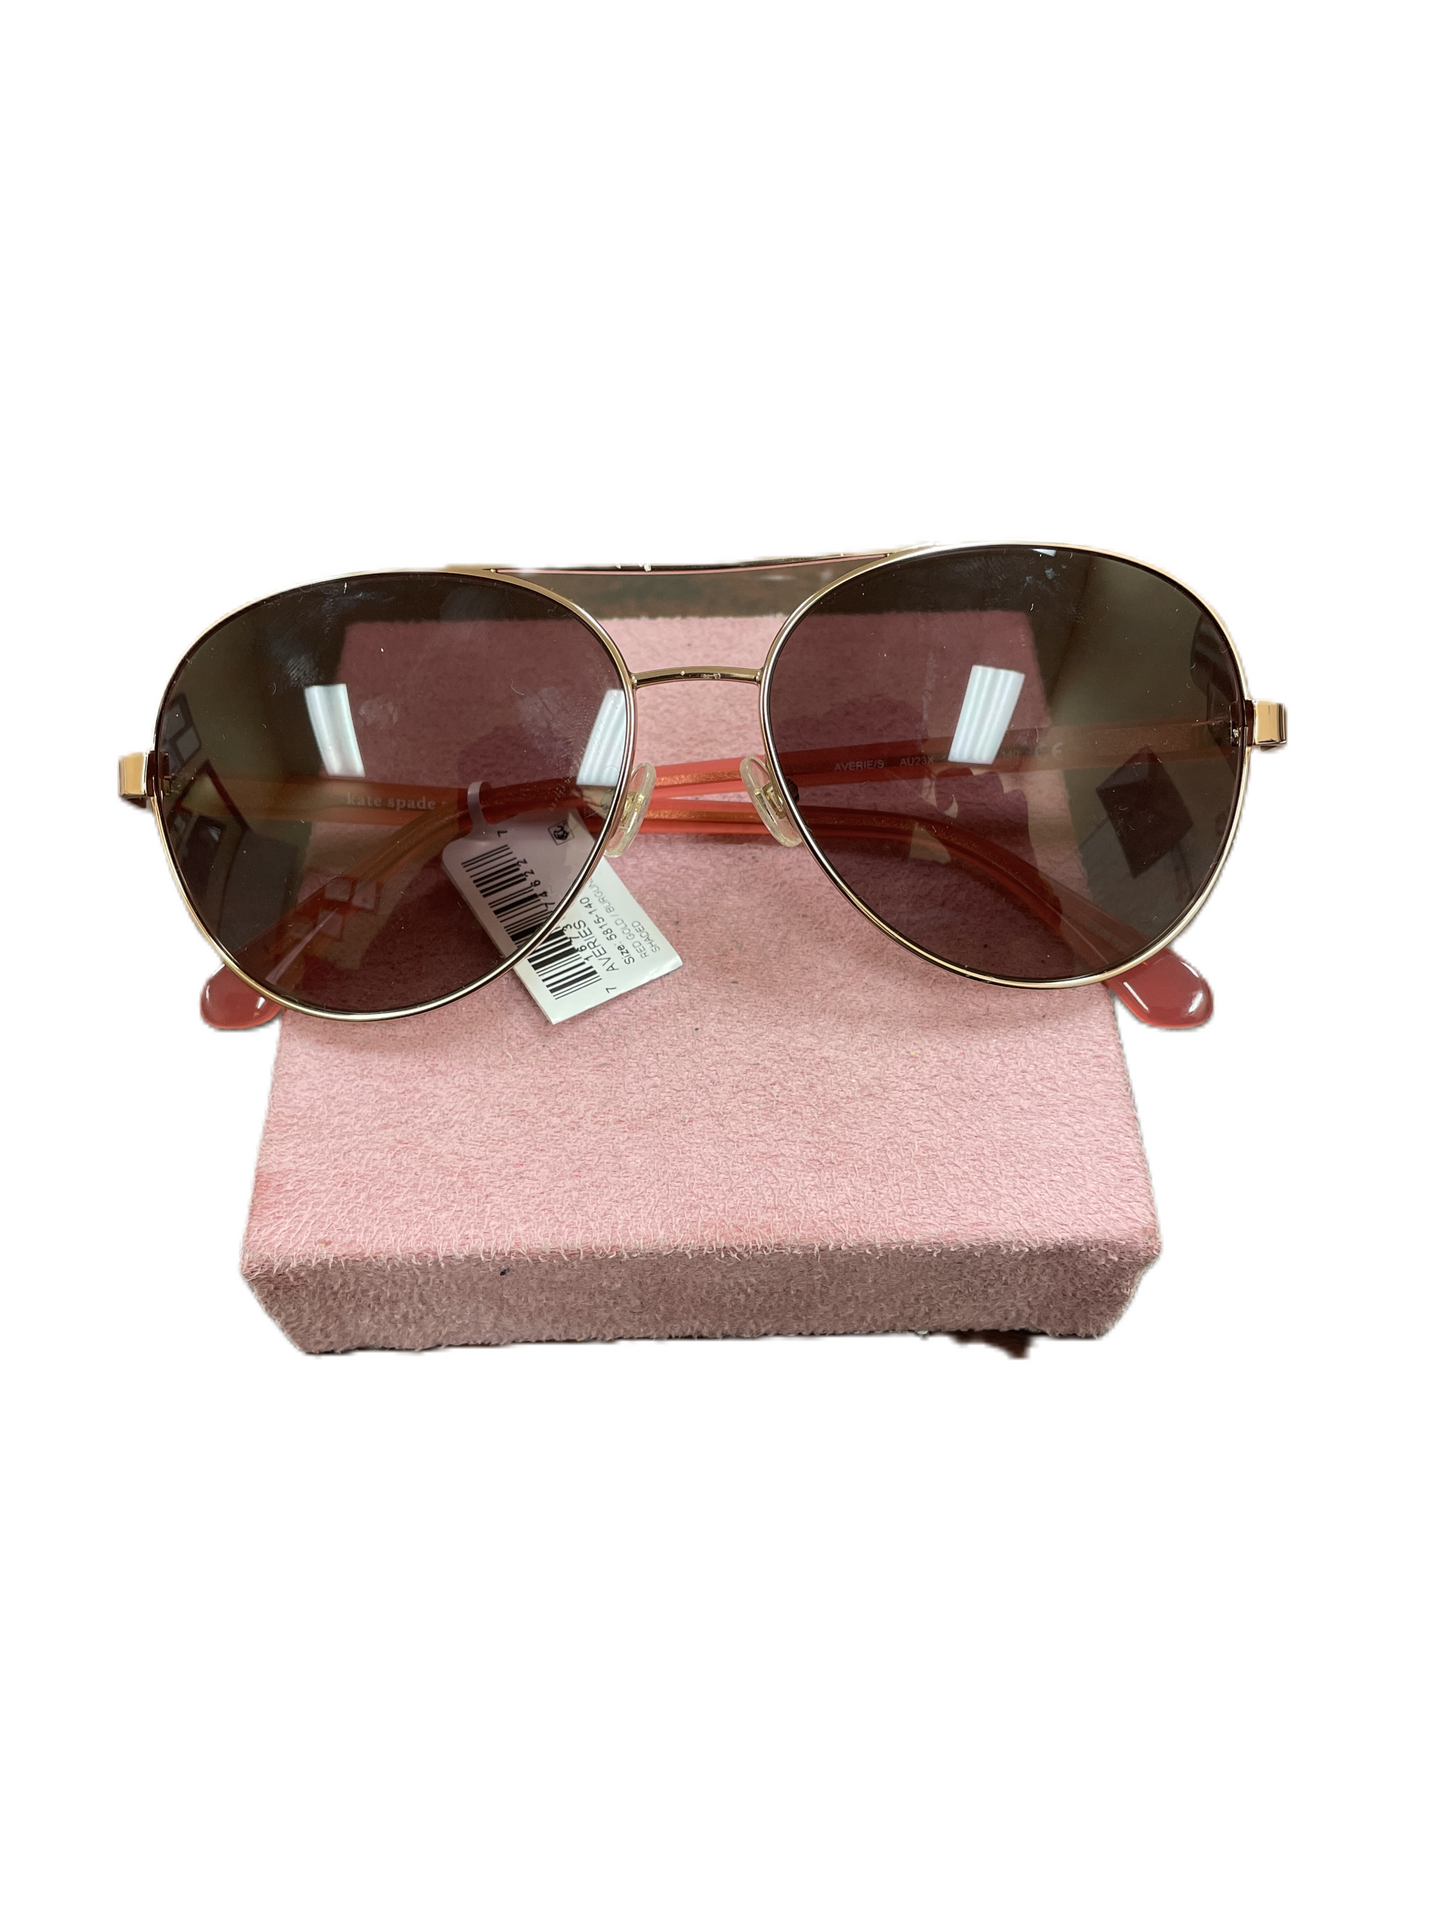 Sunglasses By Kate Spade, Size: Large